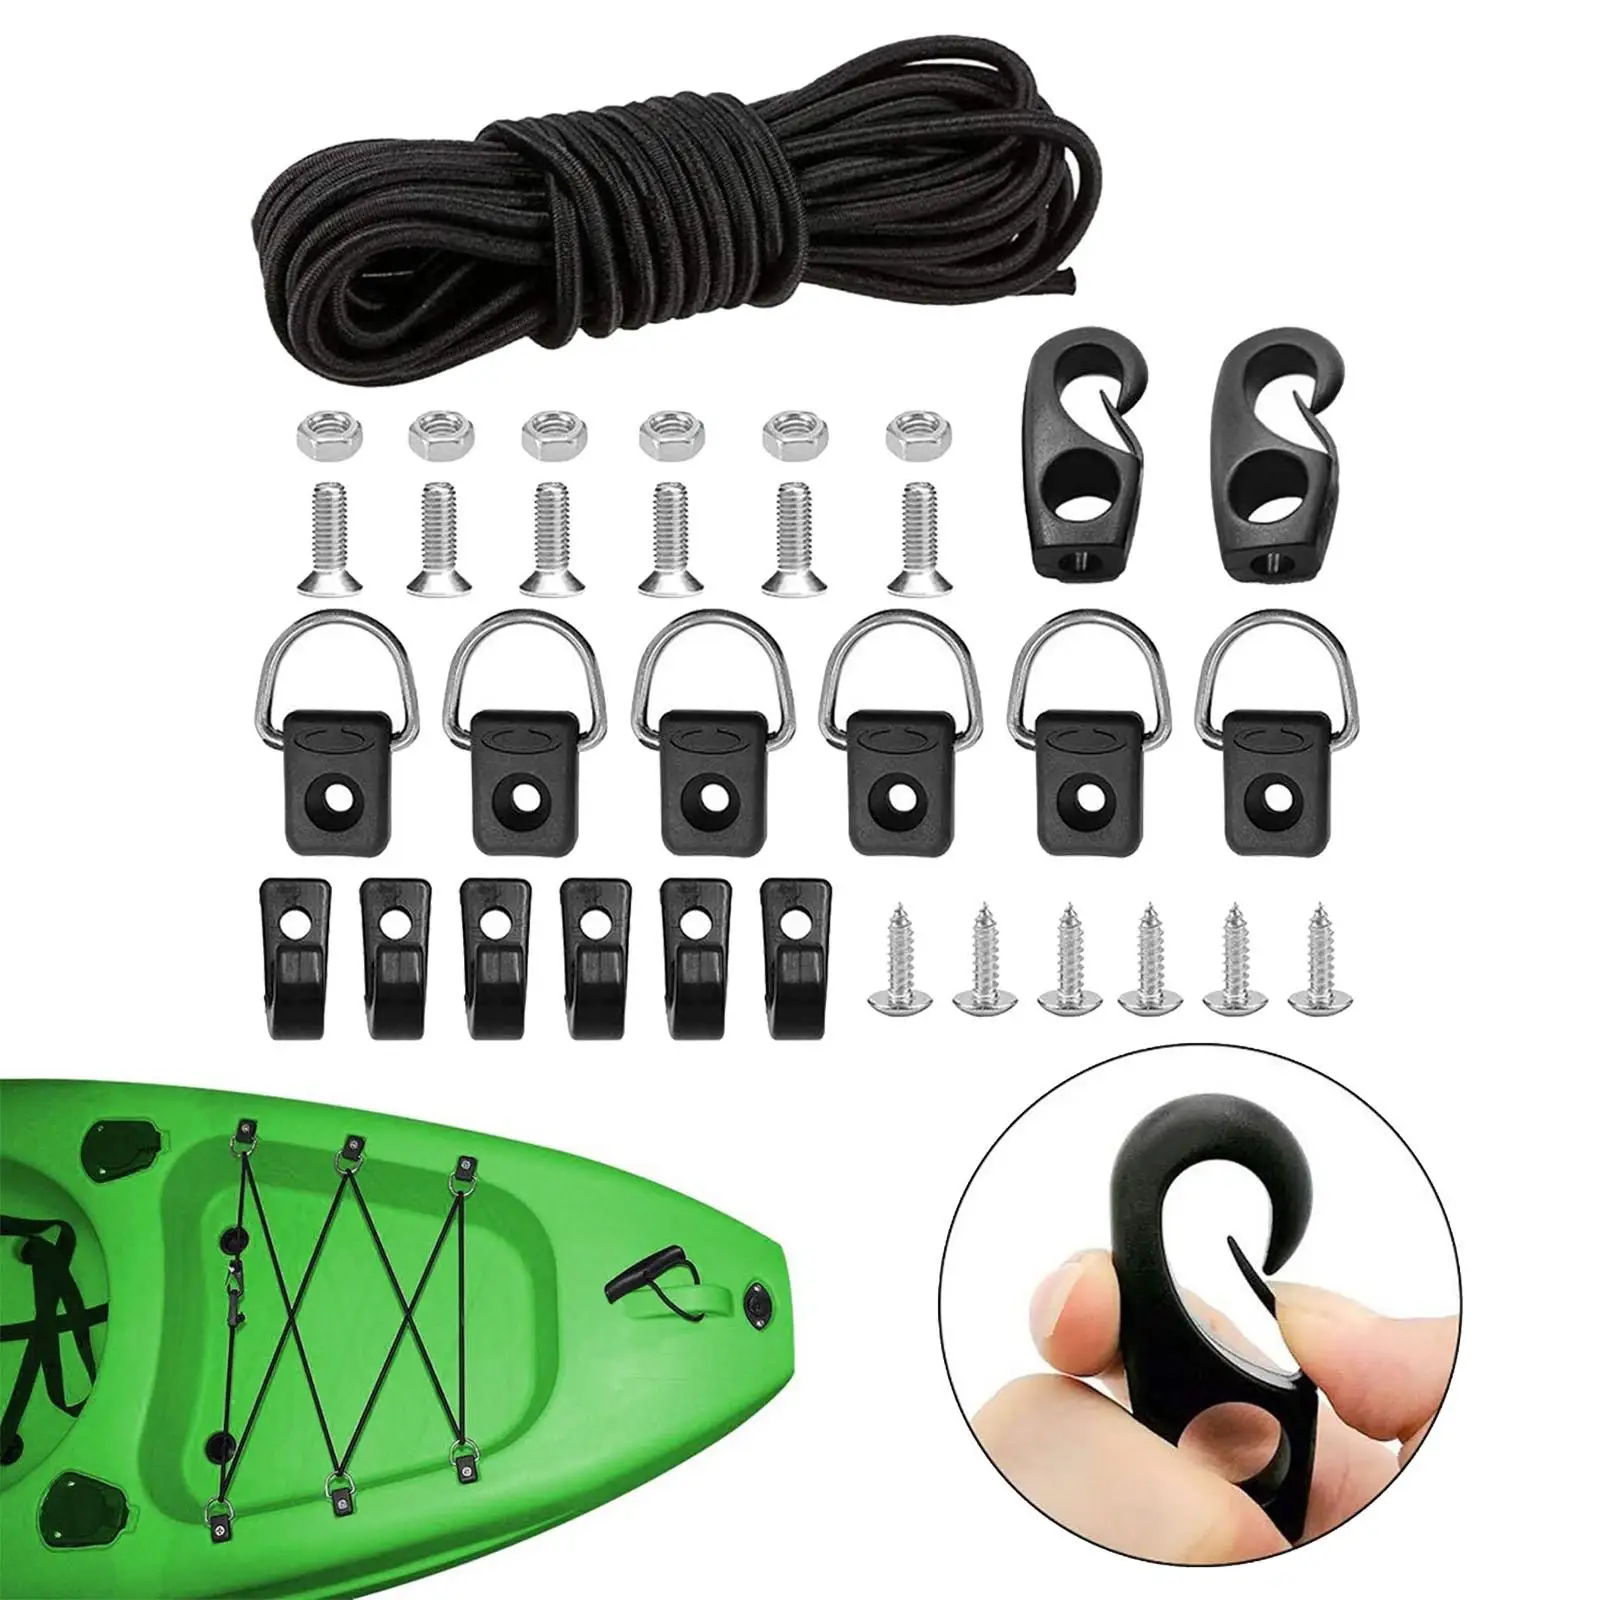 Kayak Deck Rigging Kit 8.2 Feet Bungee Cord with Ends J Hooks for Outfitting